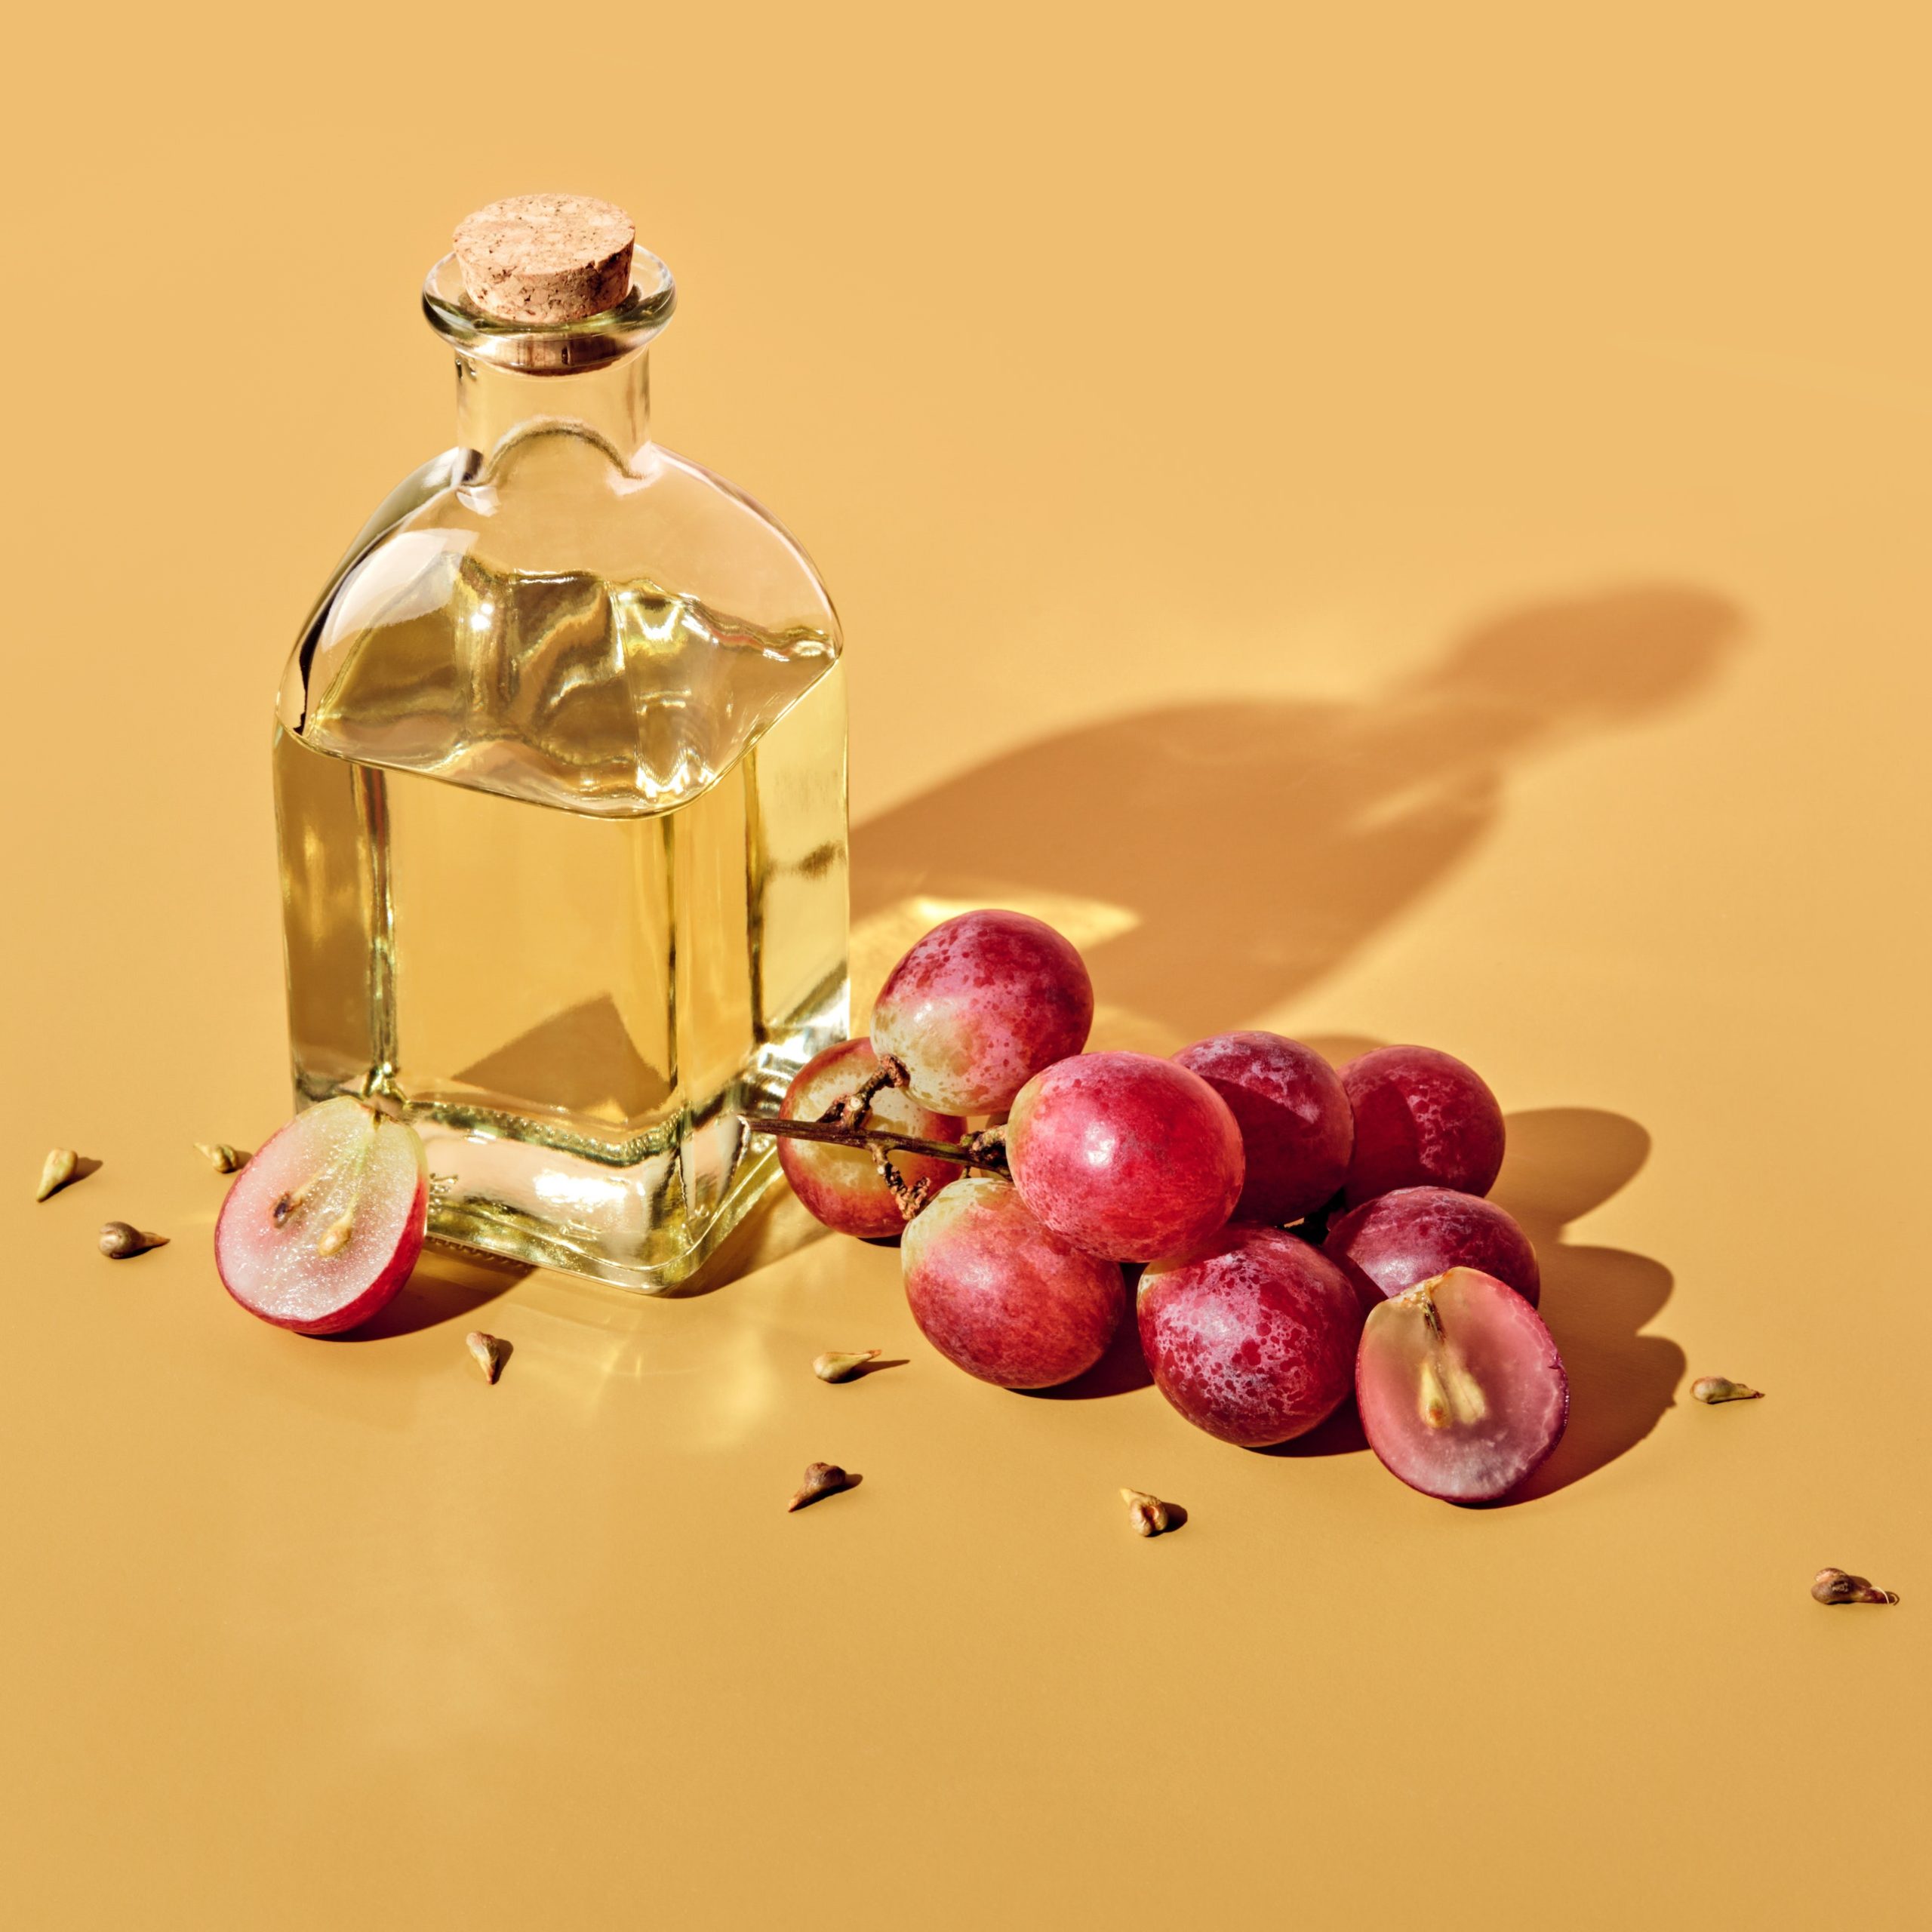 Grape seed oil is beneficial for both hair and skin, learn how to use